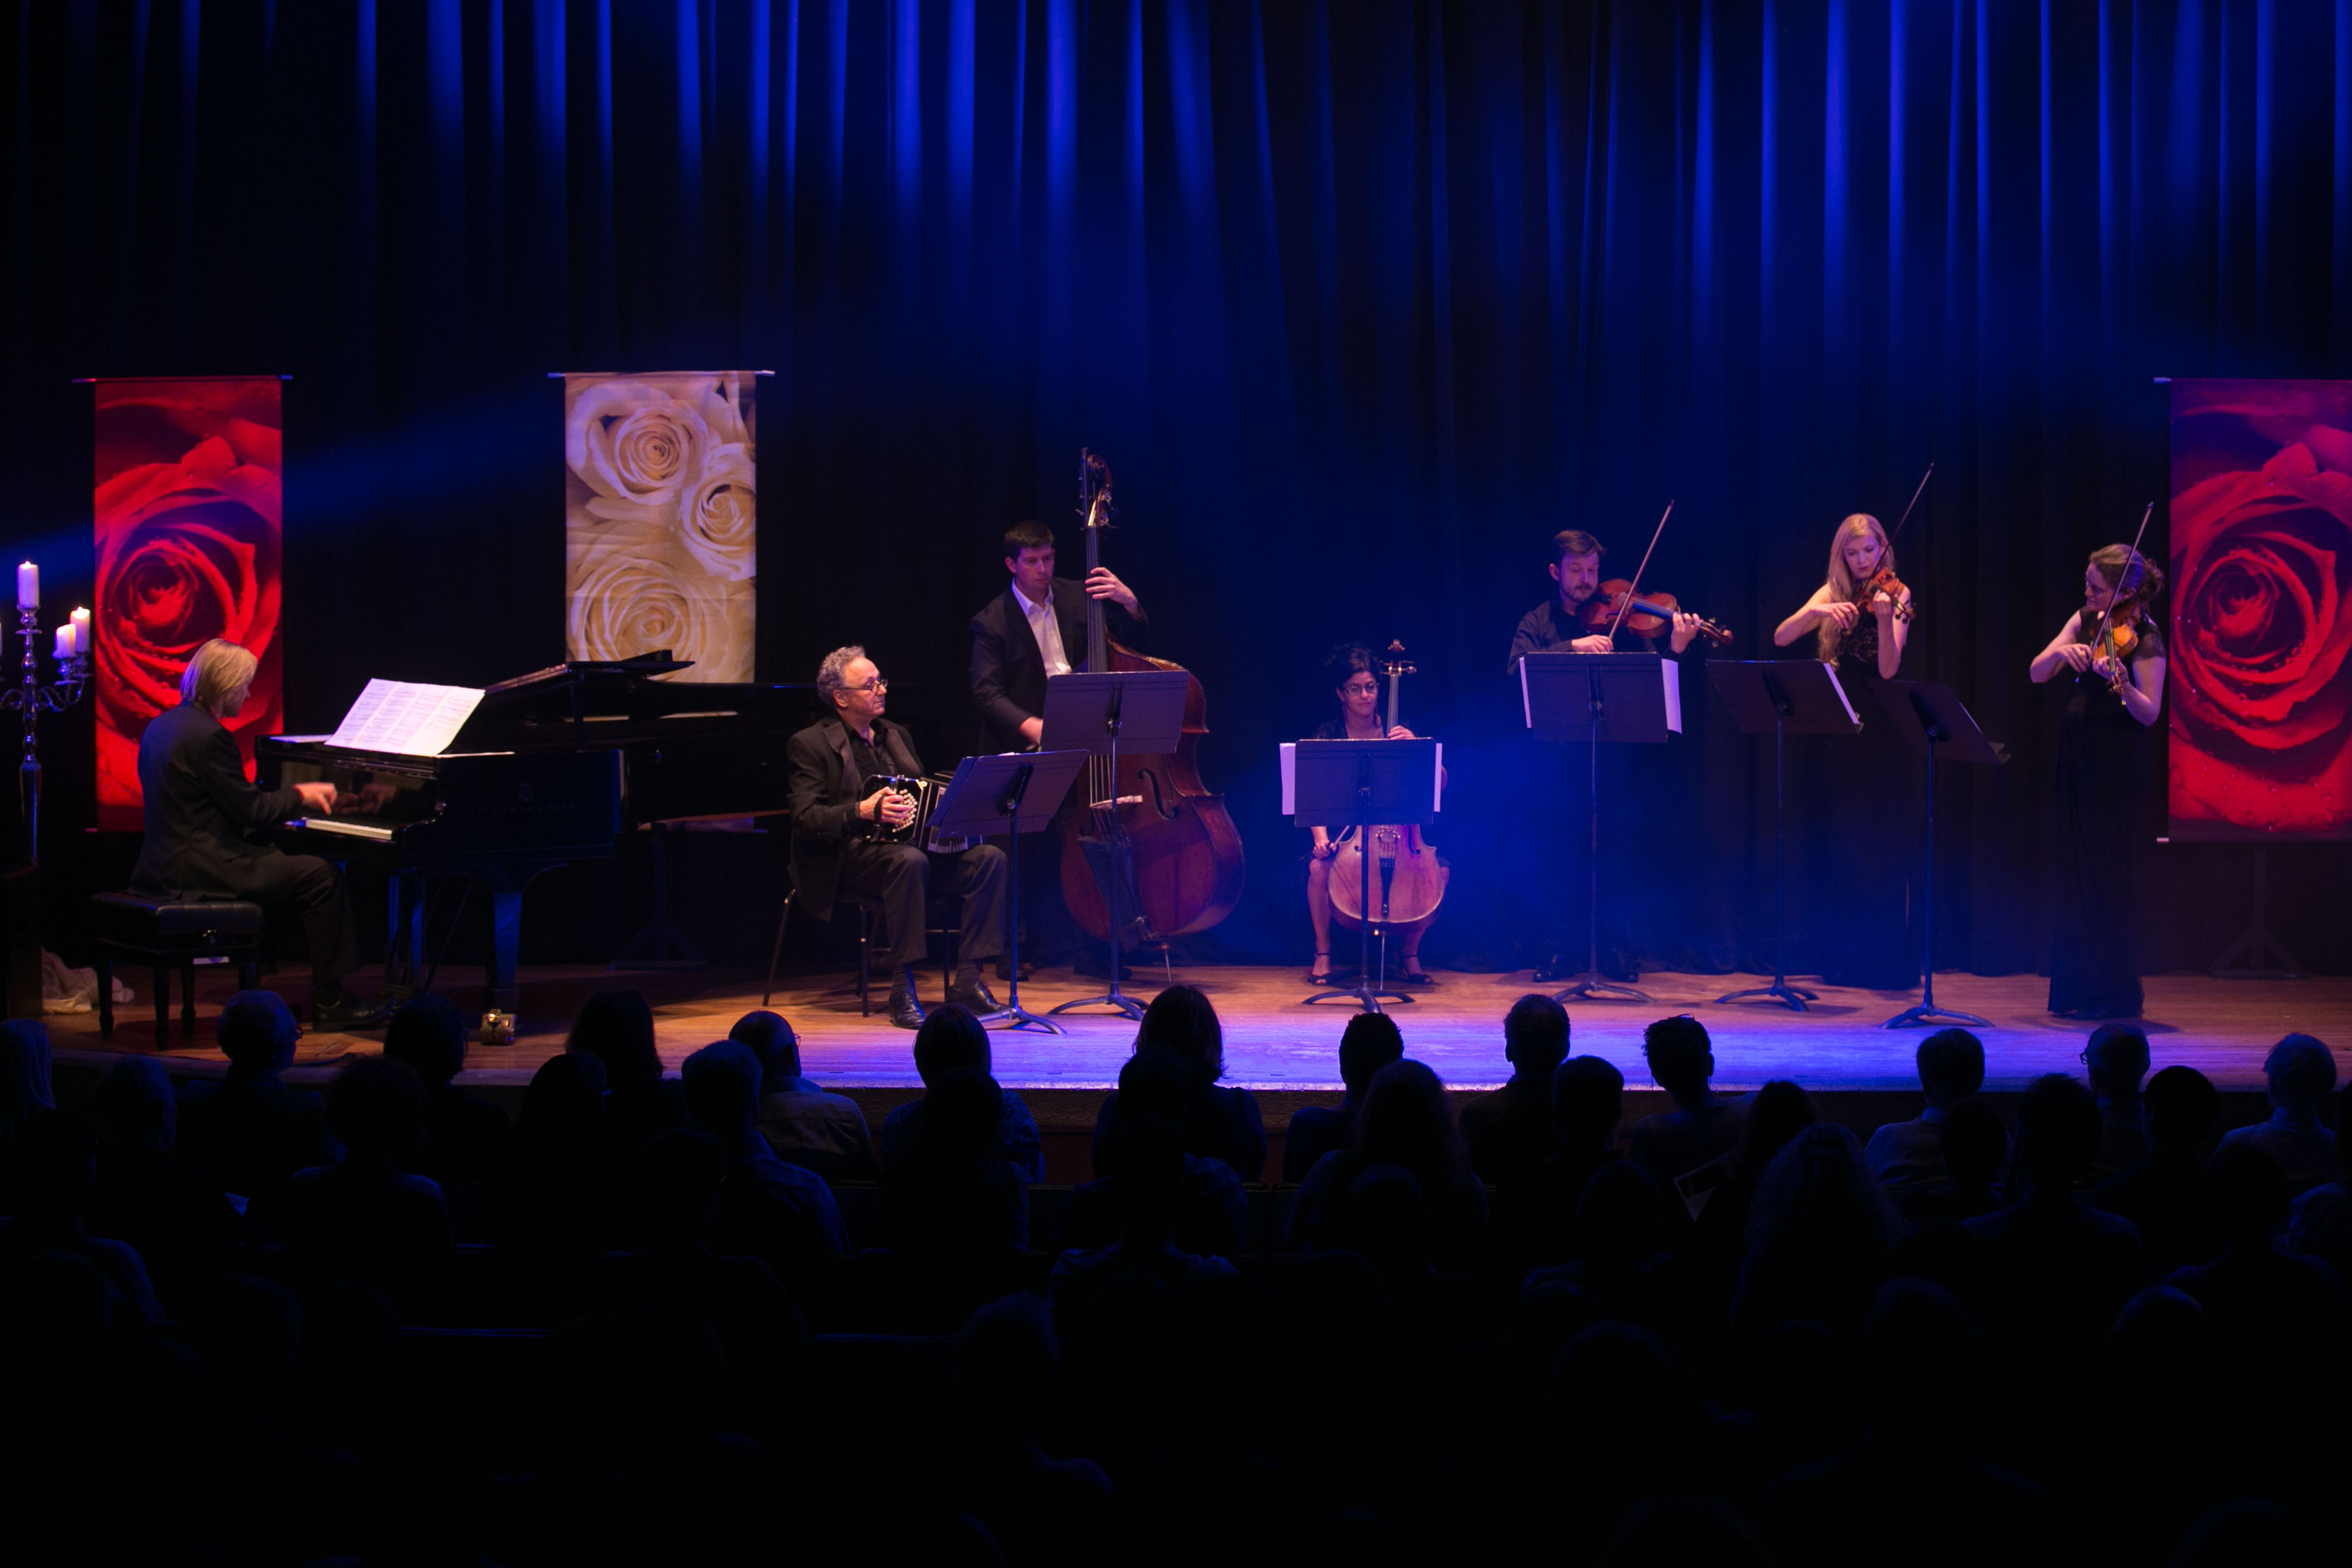 Tango Siempre at Purcell Room